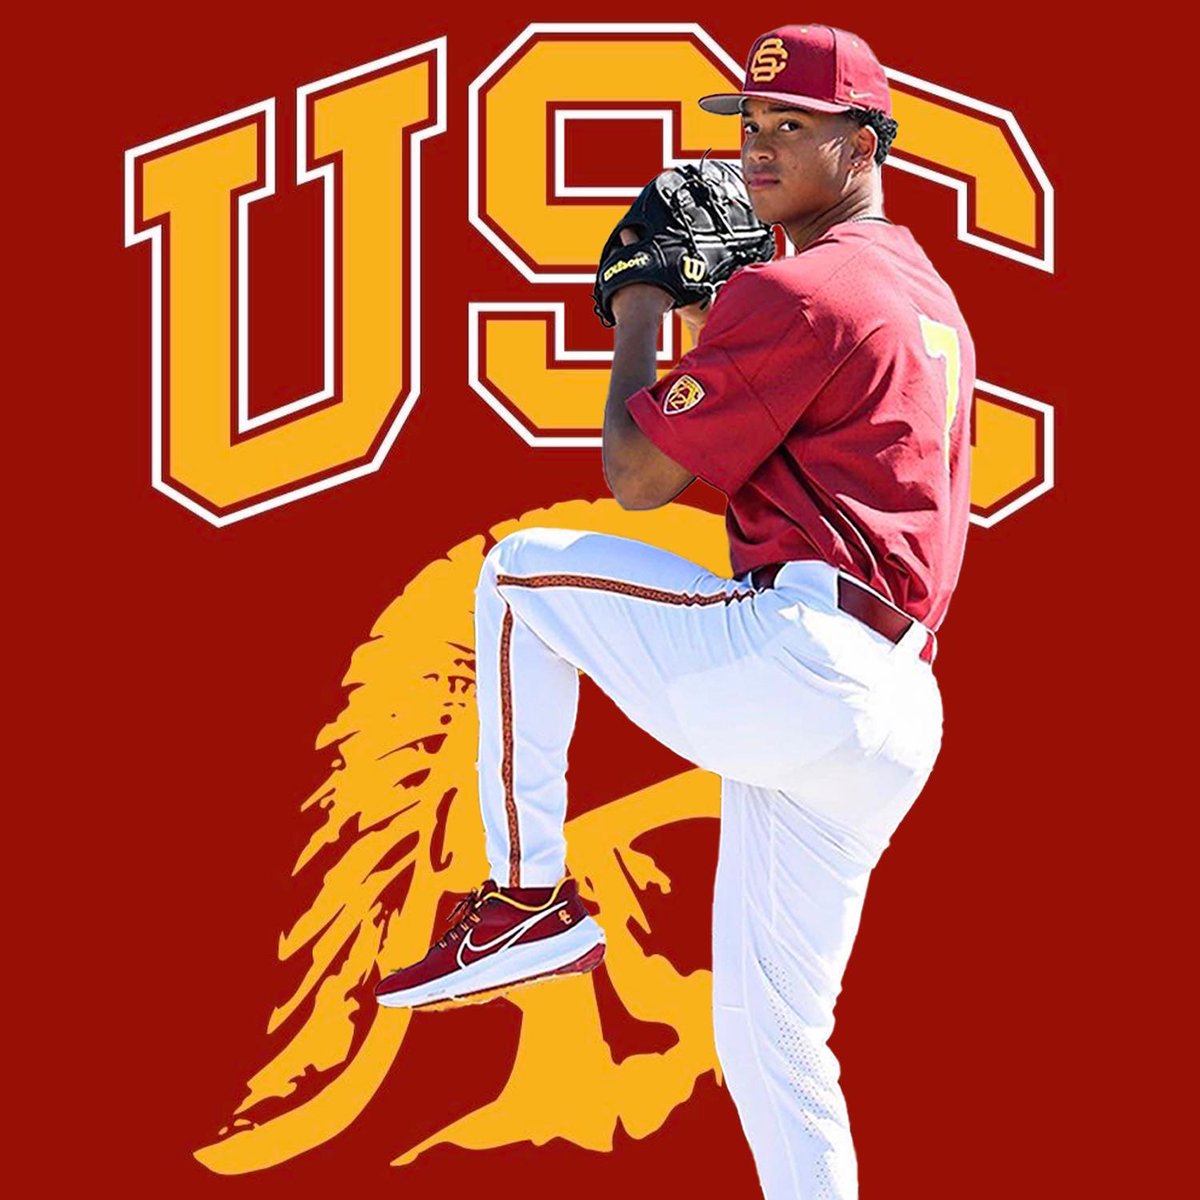 I have committed to the University of Southern California to continue my athletic and academic journey. Thank you to my family, coaches, travel teams, teachers, and many others who helped me realize my dream. @USC_Baseball #FightOn ✌🏾